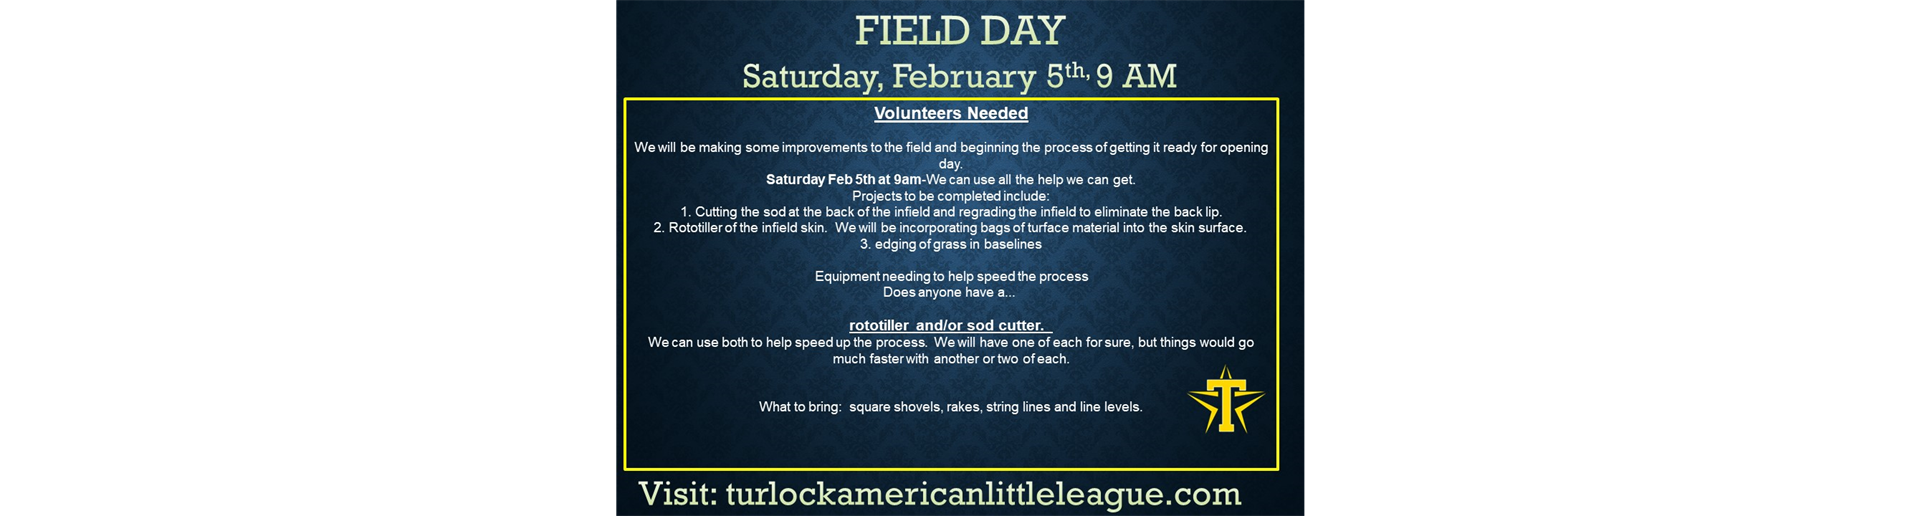 FIELD DAY - COME HELP IMPROVE THE FIELD ON FEBRUARY 5TH